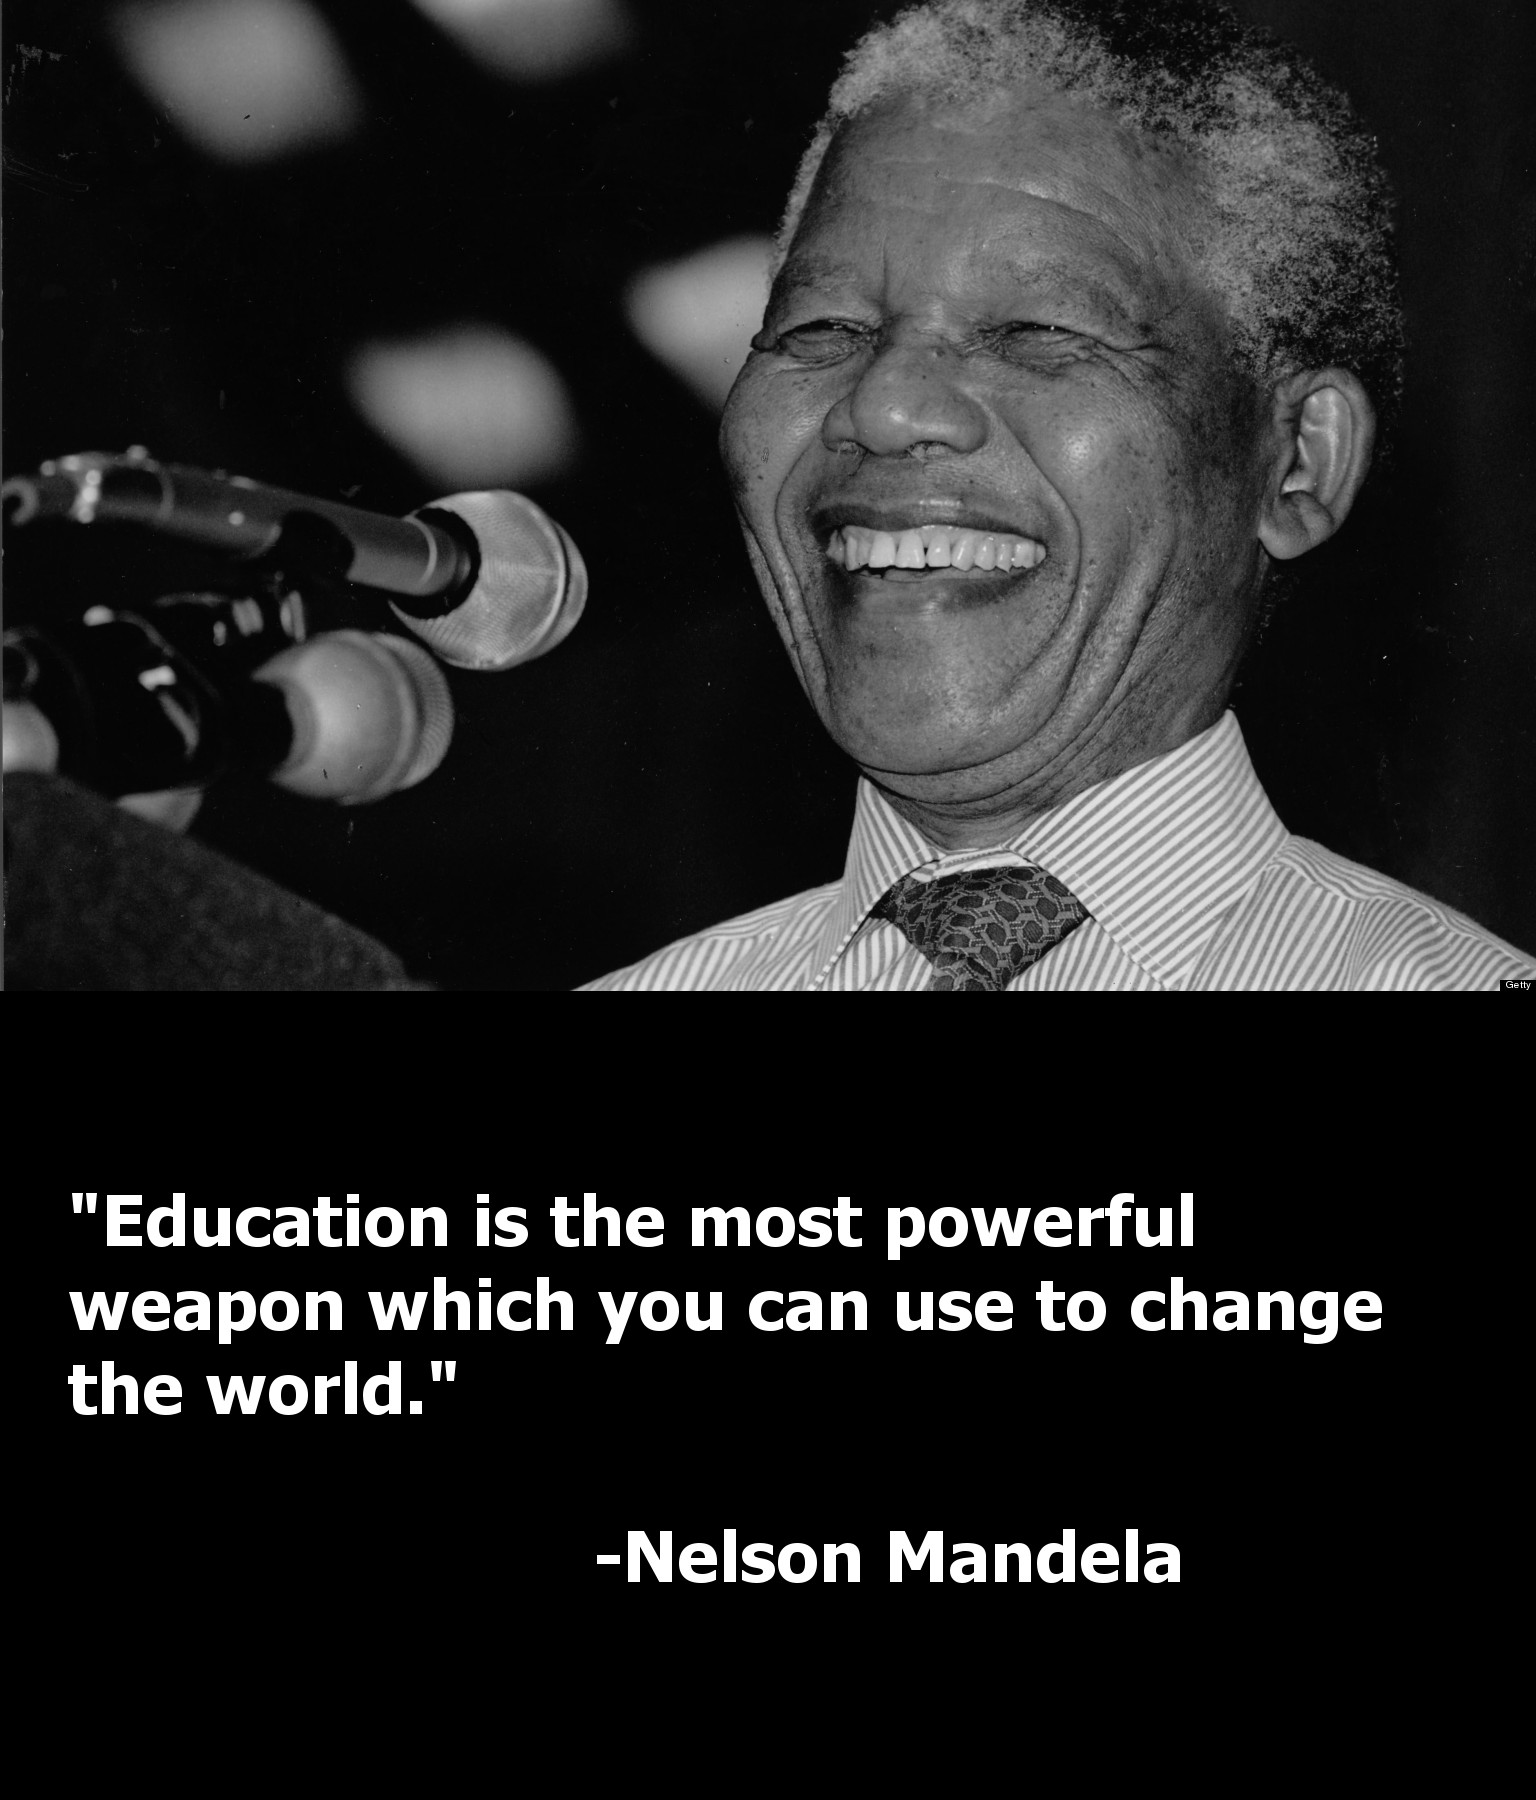 Nelson Mandela Quotes About Education
 Why This Trip